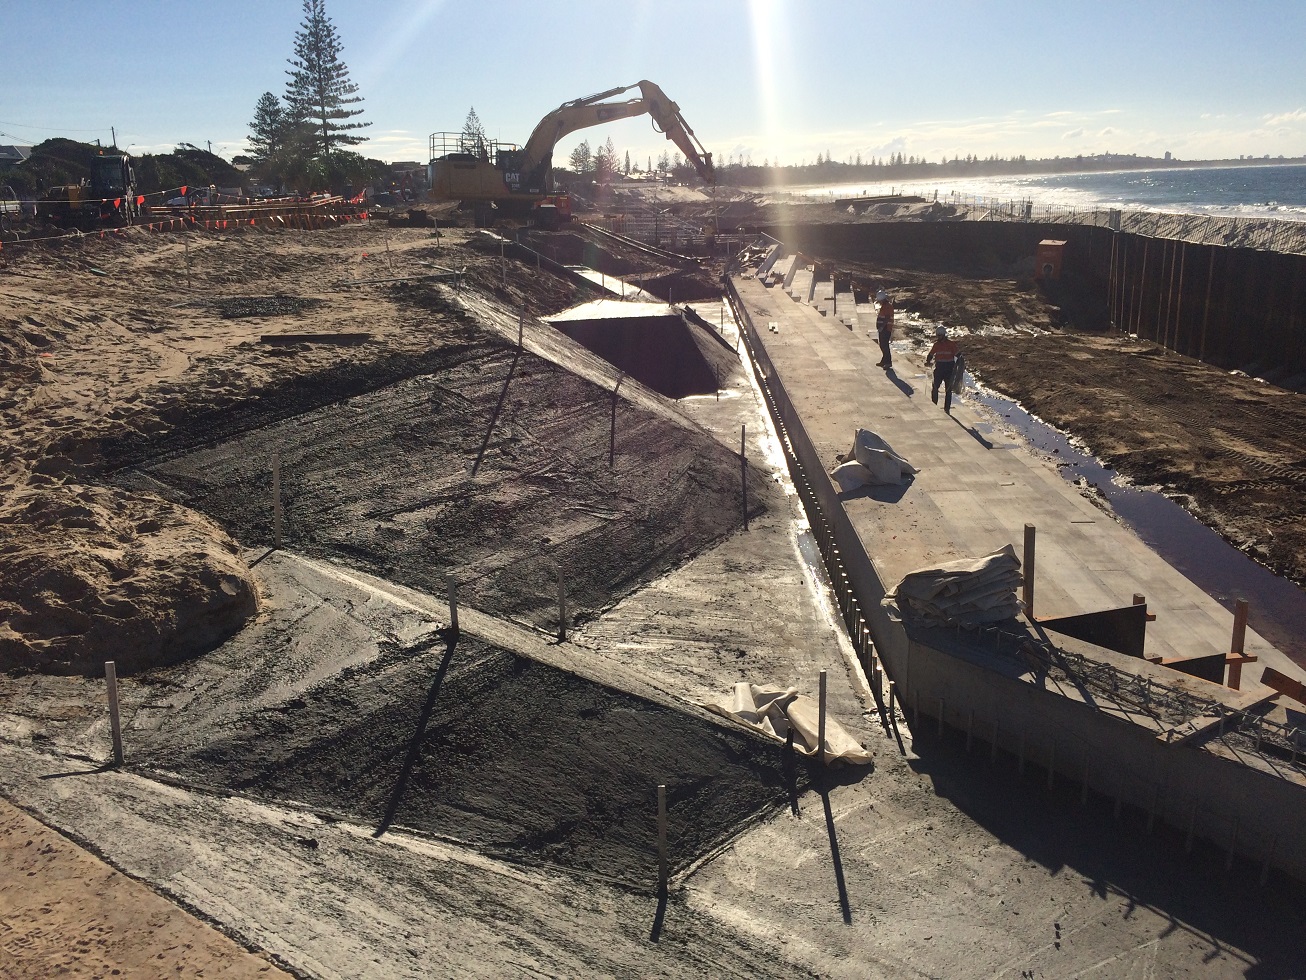 The seawall included a concrete section formed on 230 piles constructed from marine grade concrete